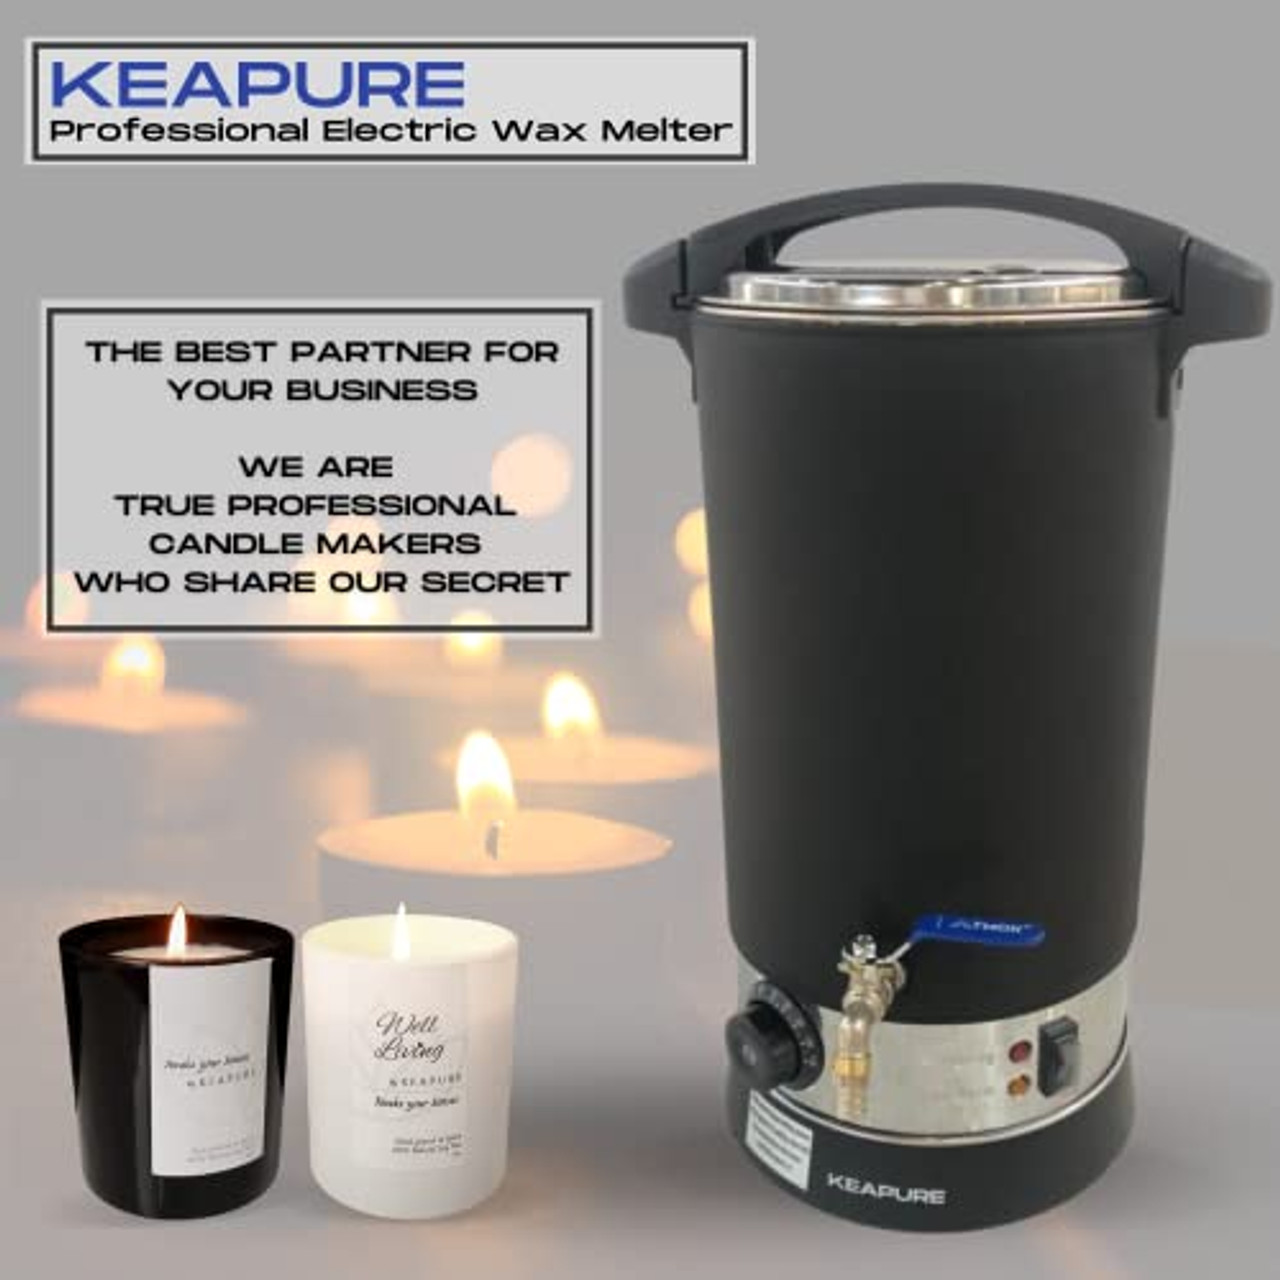 Wax Melter For Candle Making, This Wax Warmer Will Hold 7 Qts Of Melte –  Soy Lite Candle Supplies